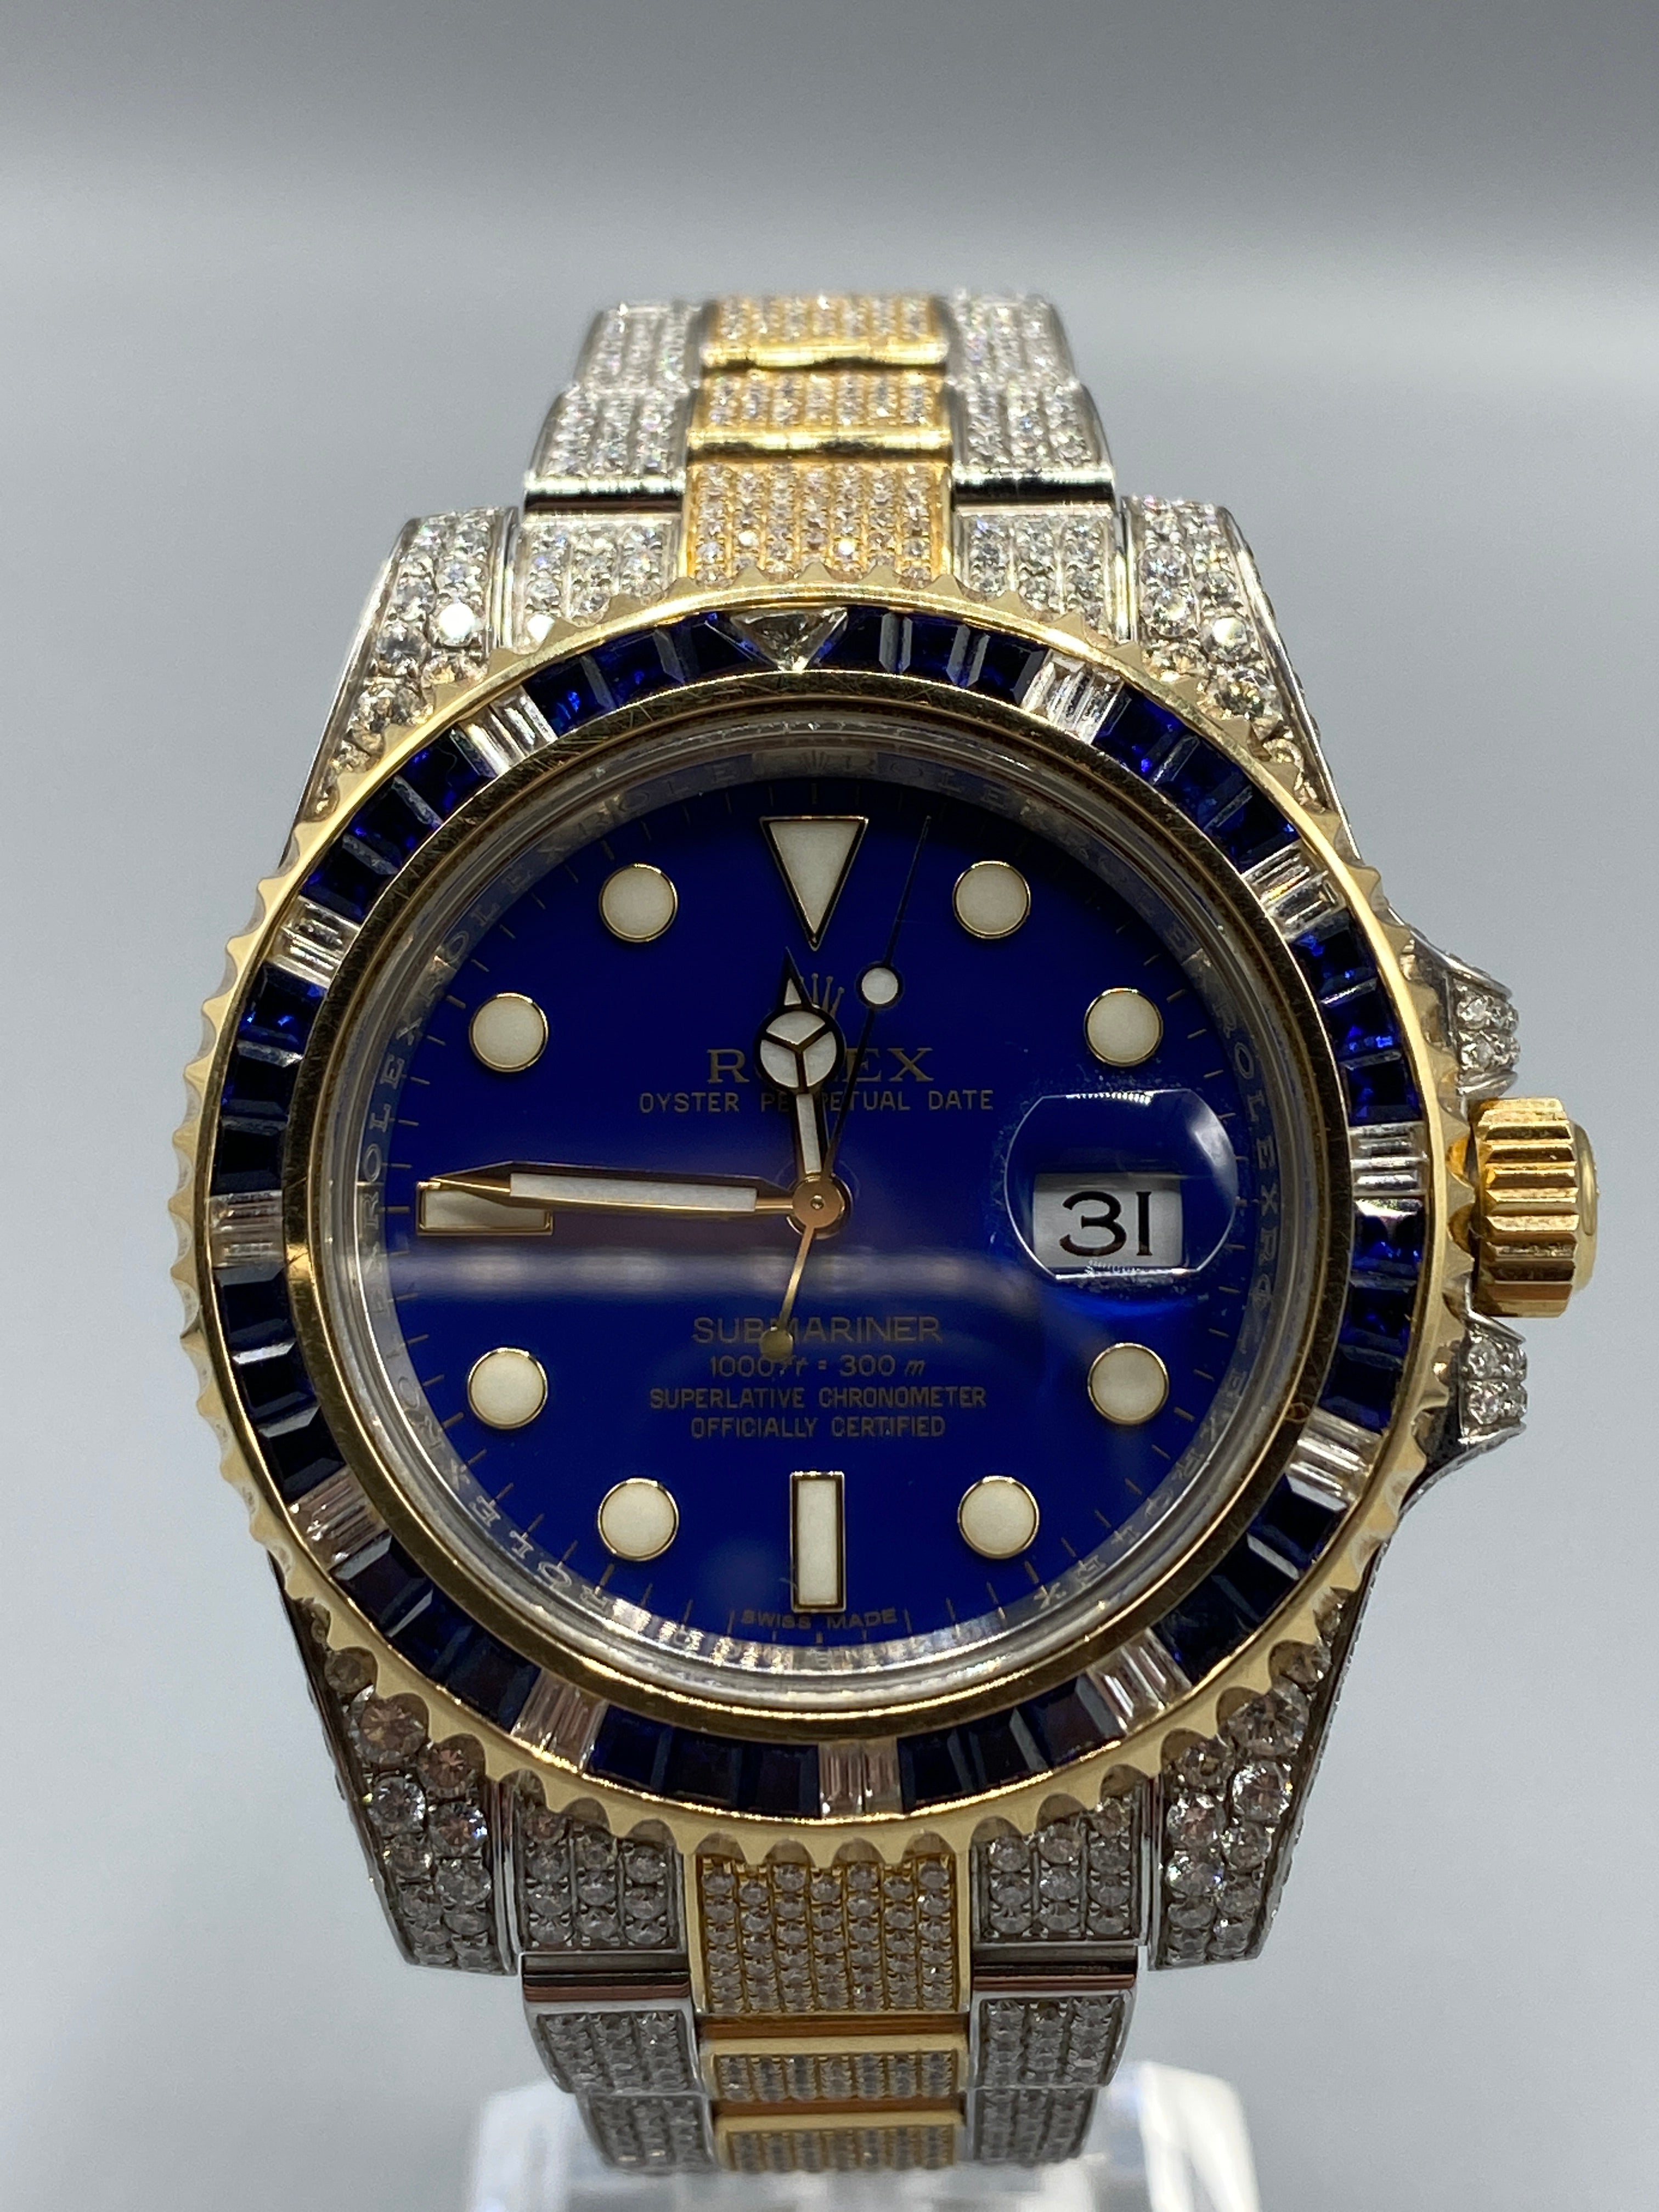 Rolex Submariner Date "Iced Out"